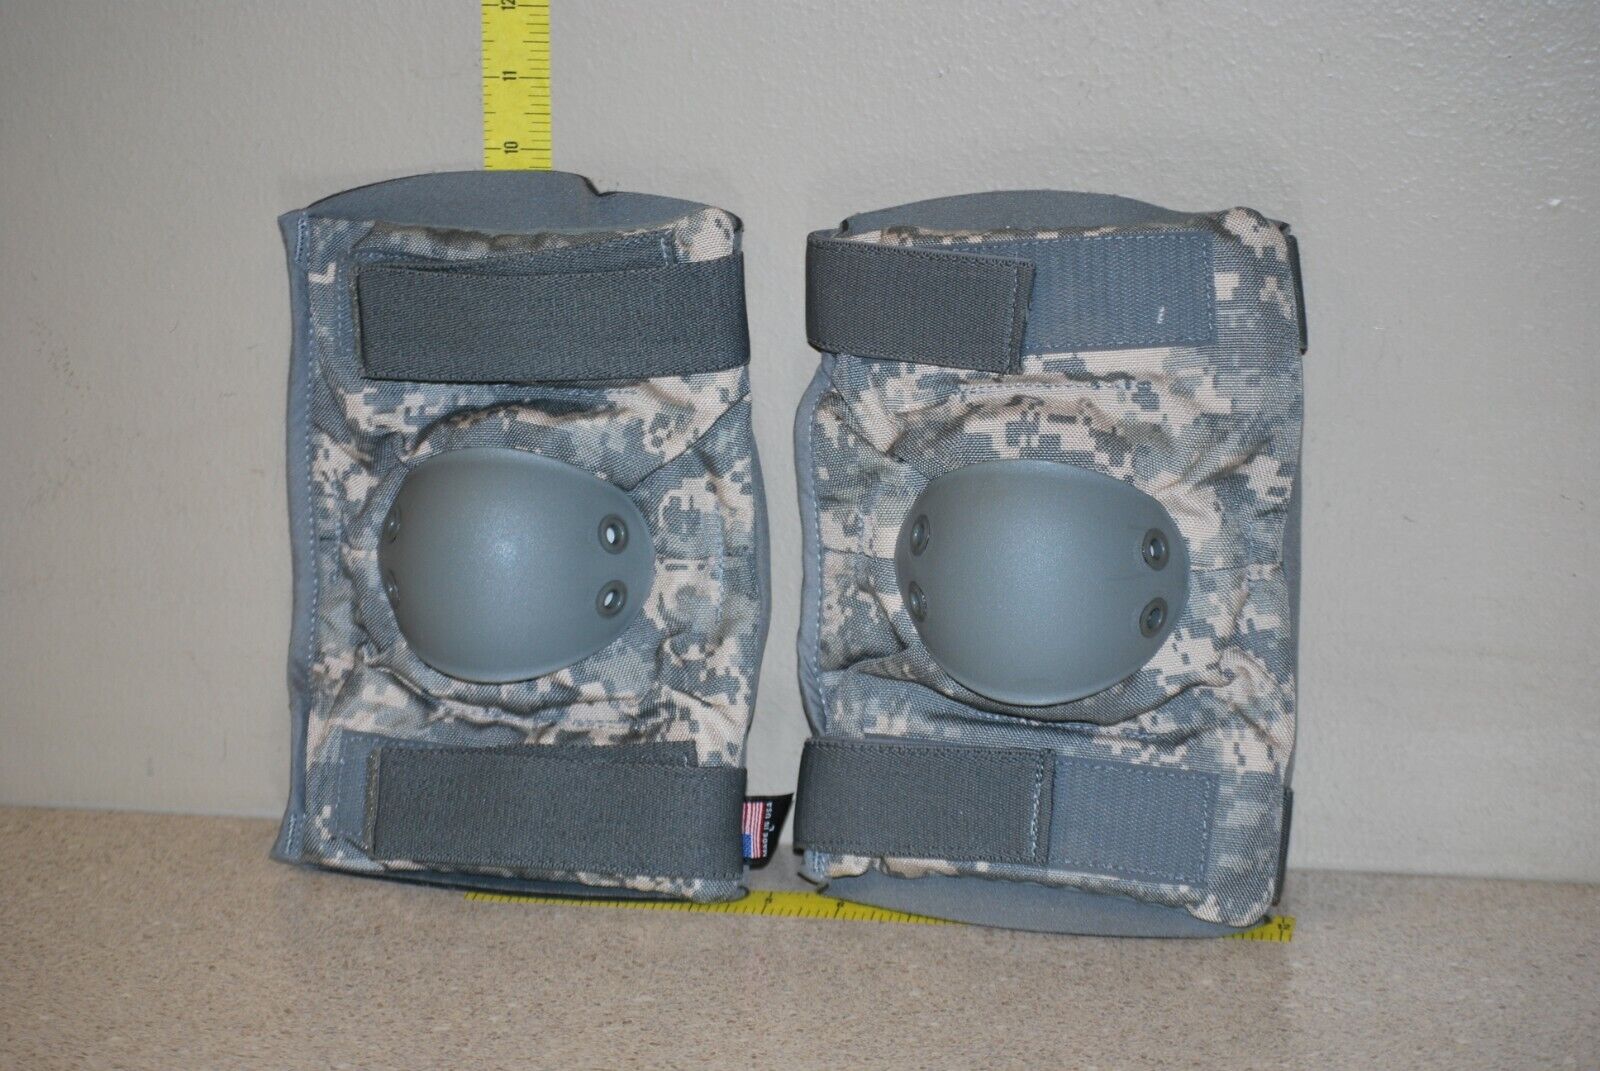 ELBOW PADS   LOT OF 20 SIZE: LARGE  DIGITAL ACU PATTERN    NSN: 8415-01-530-2161